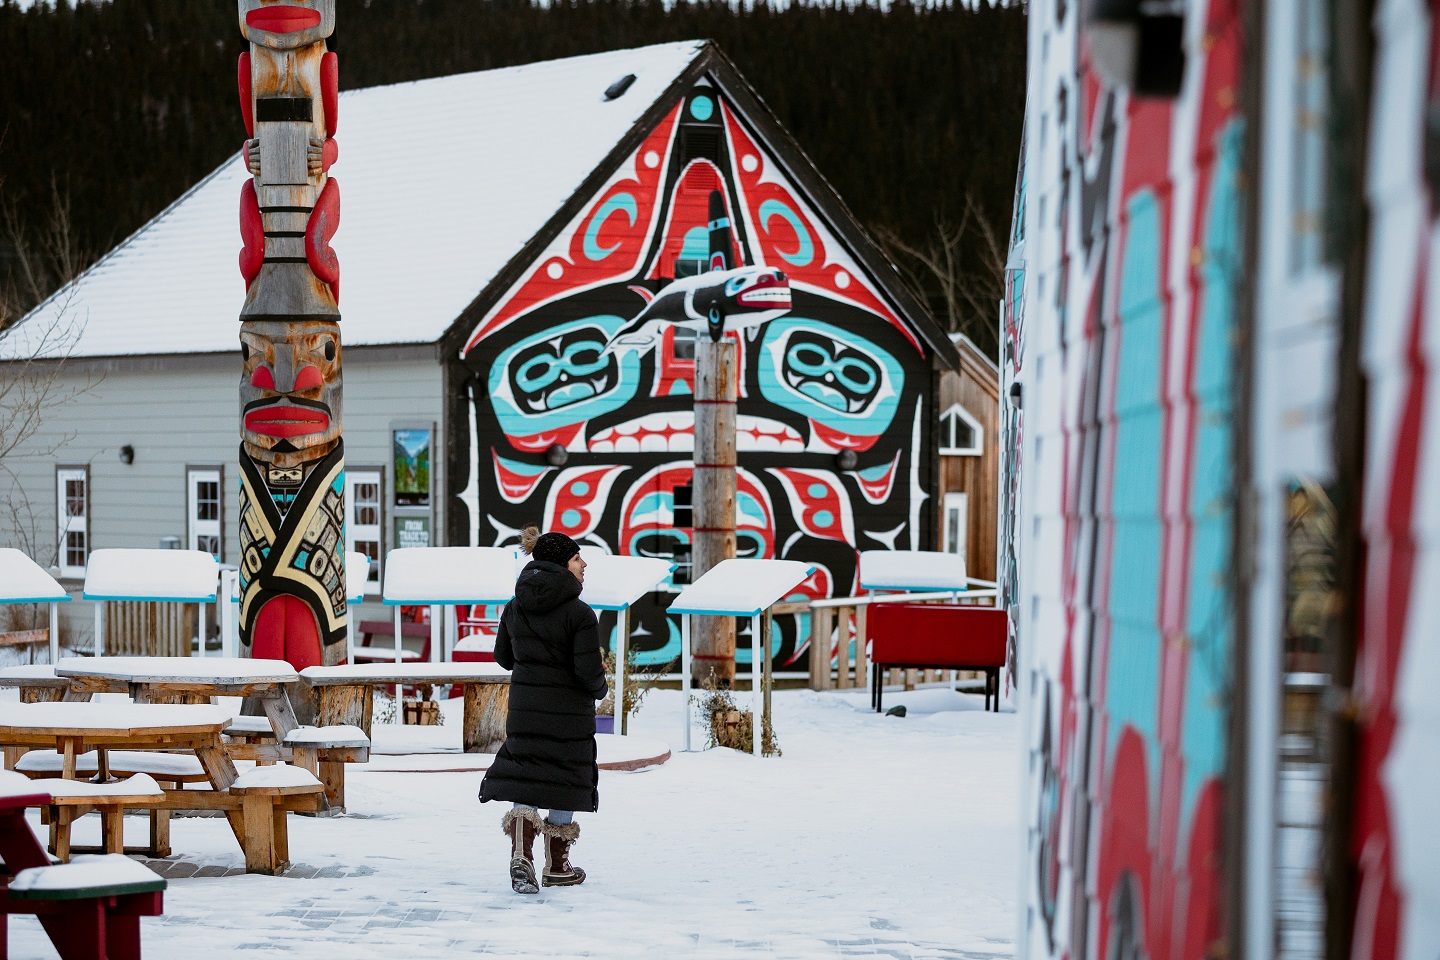 A person walks by vibrant Indigenous murals and art in the snow.